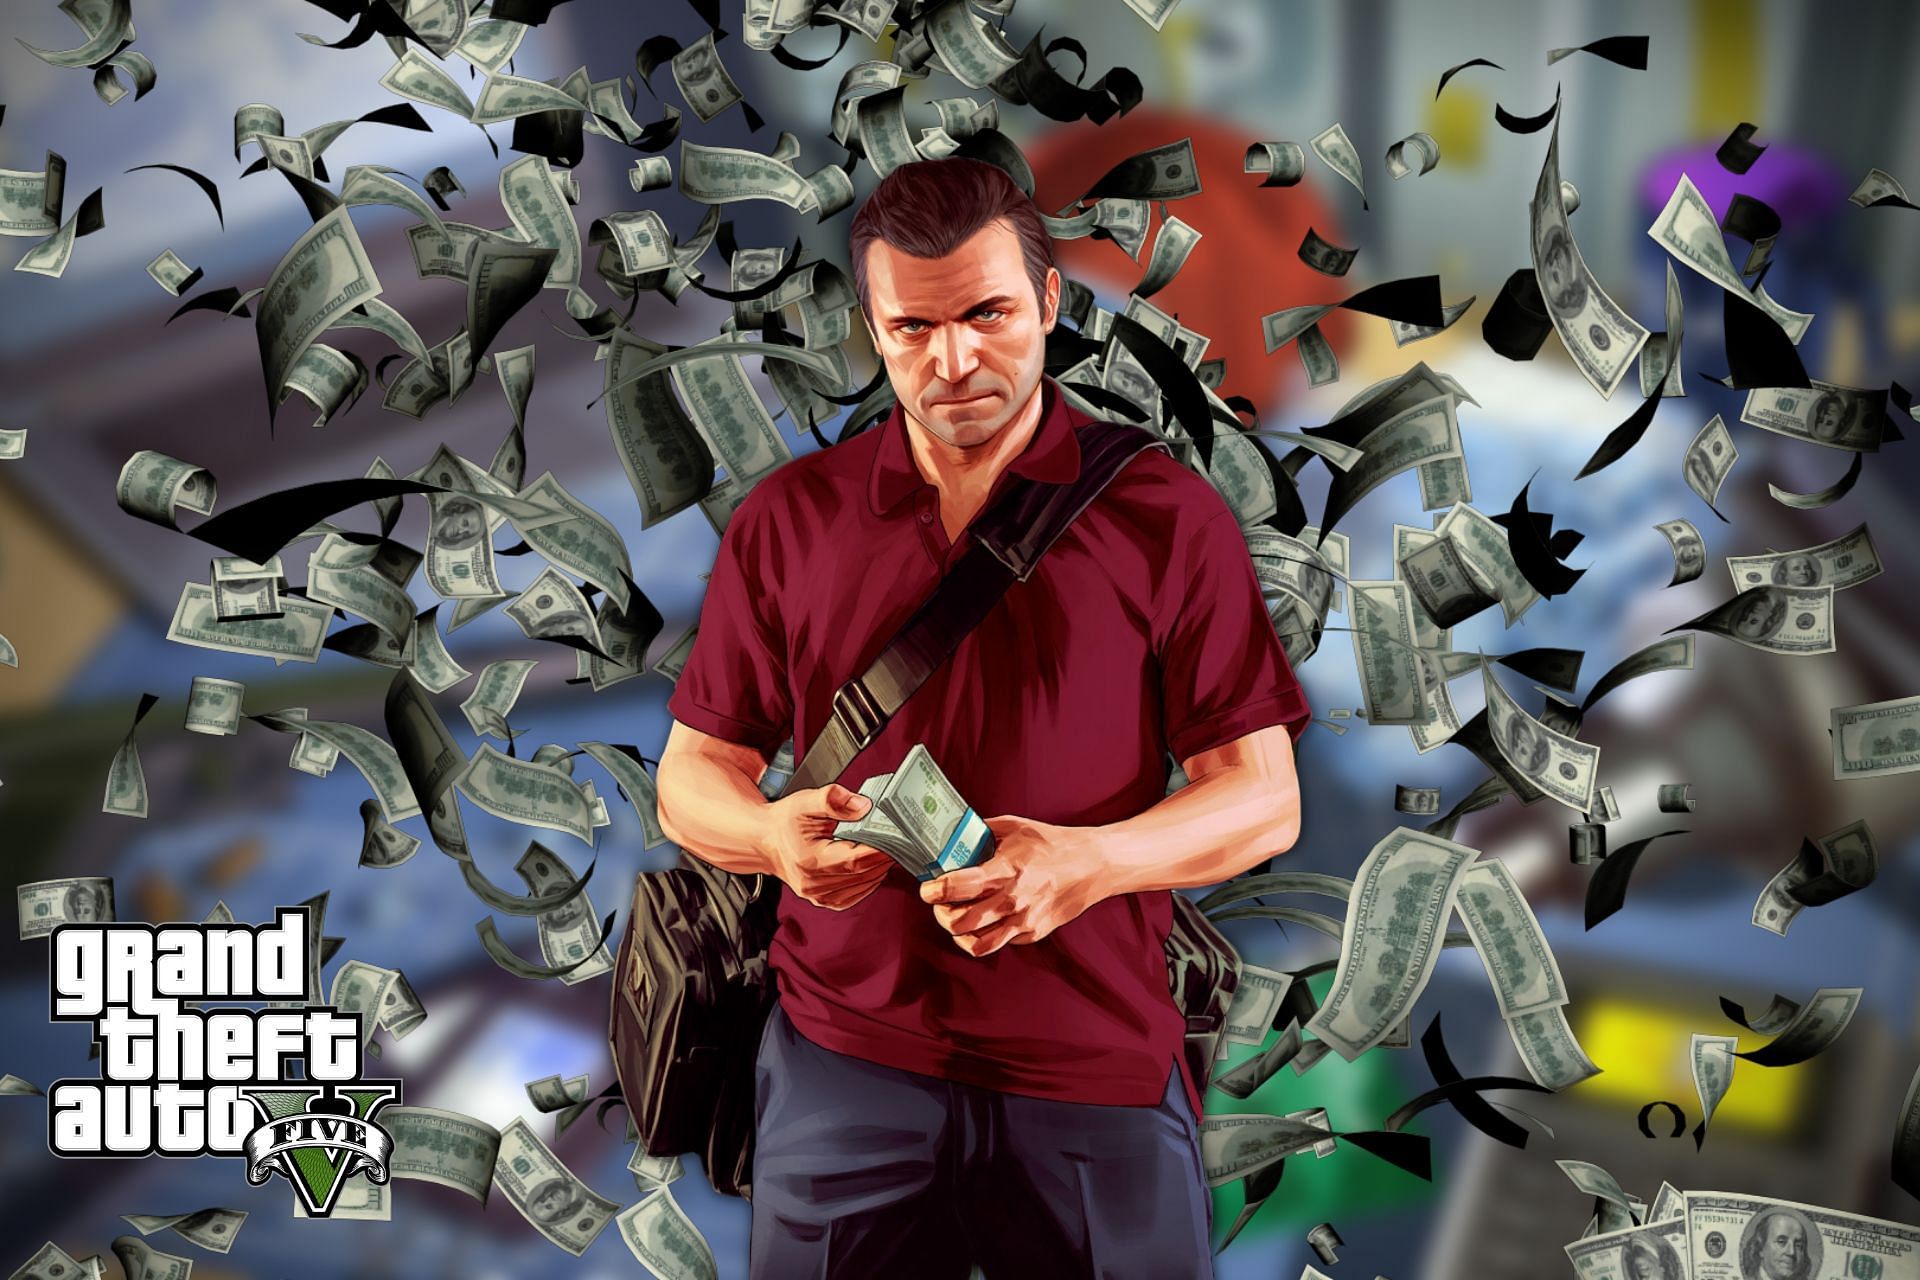 How can players get more rich in GTA 5? (Image via Sportskeeda)